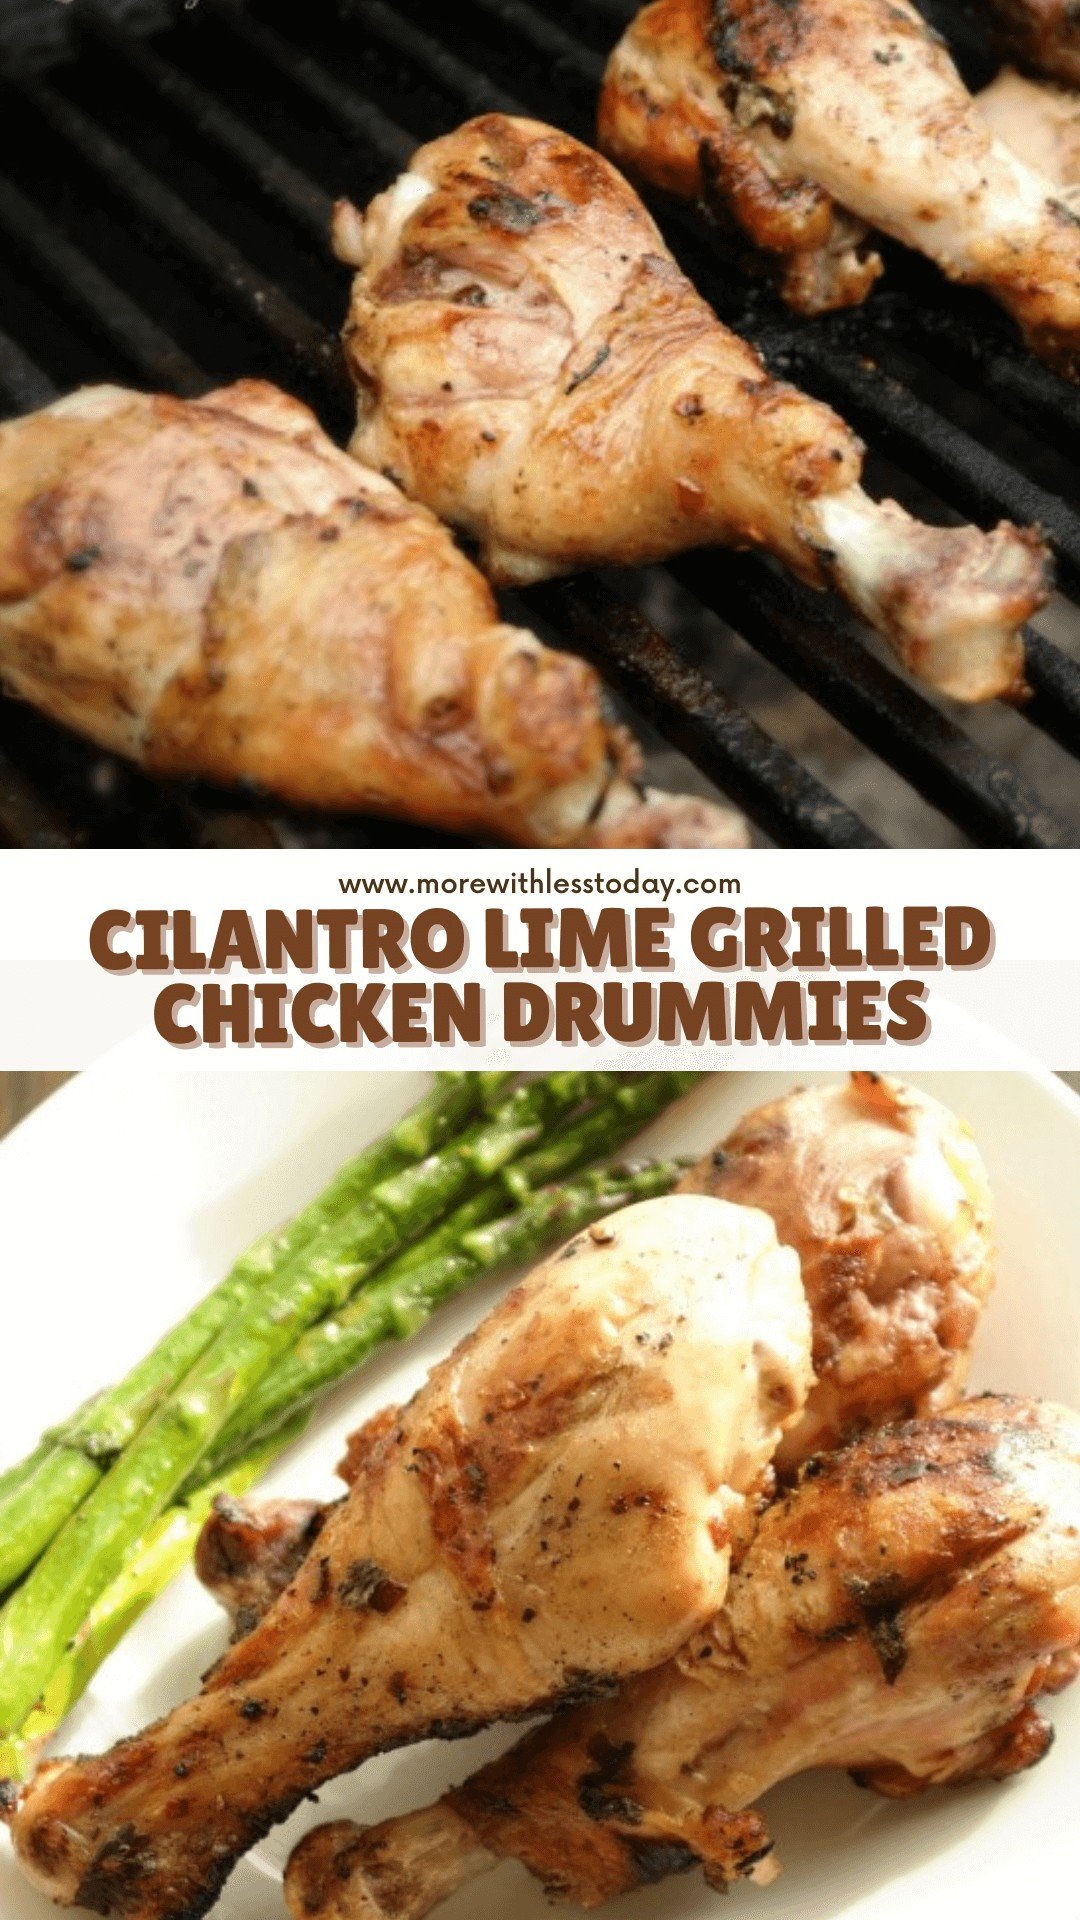 Cilantro Lime Grilled Chicken Drummies - PIN